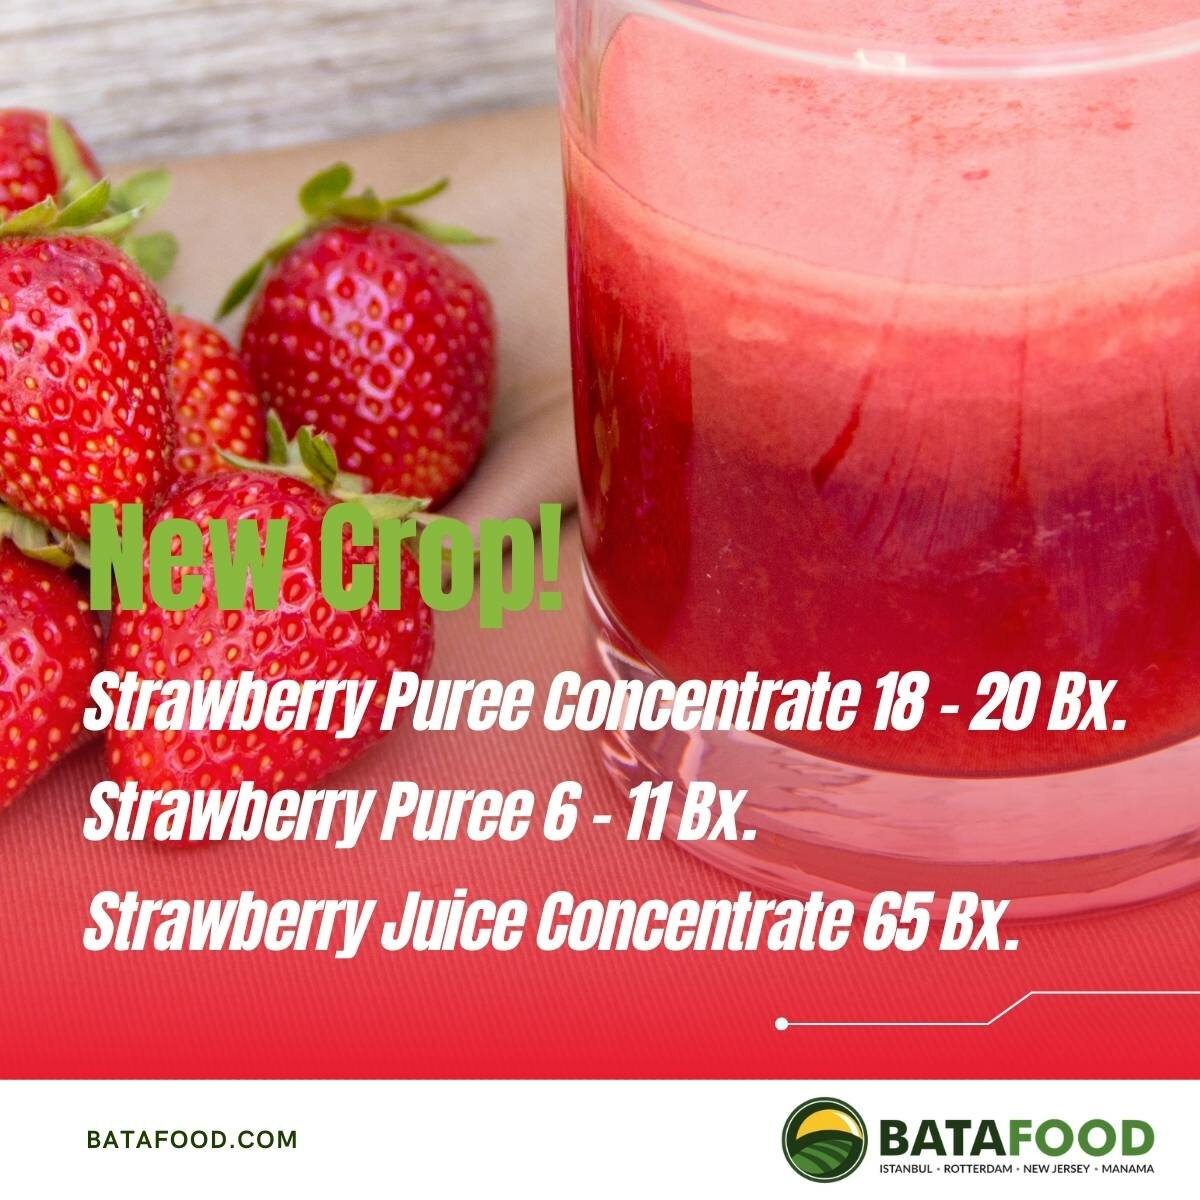 Strawberry Juice Concentrate, Strawberry Puree Concentrate supplier producer Bata Food Turkey Netherlands USA